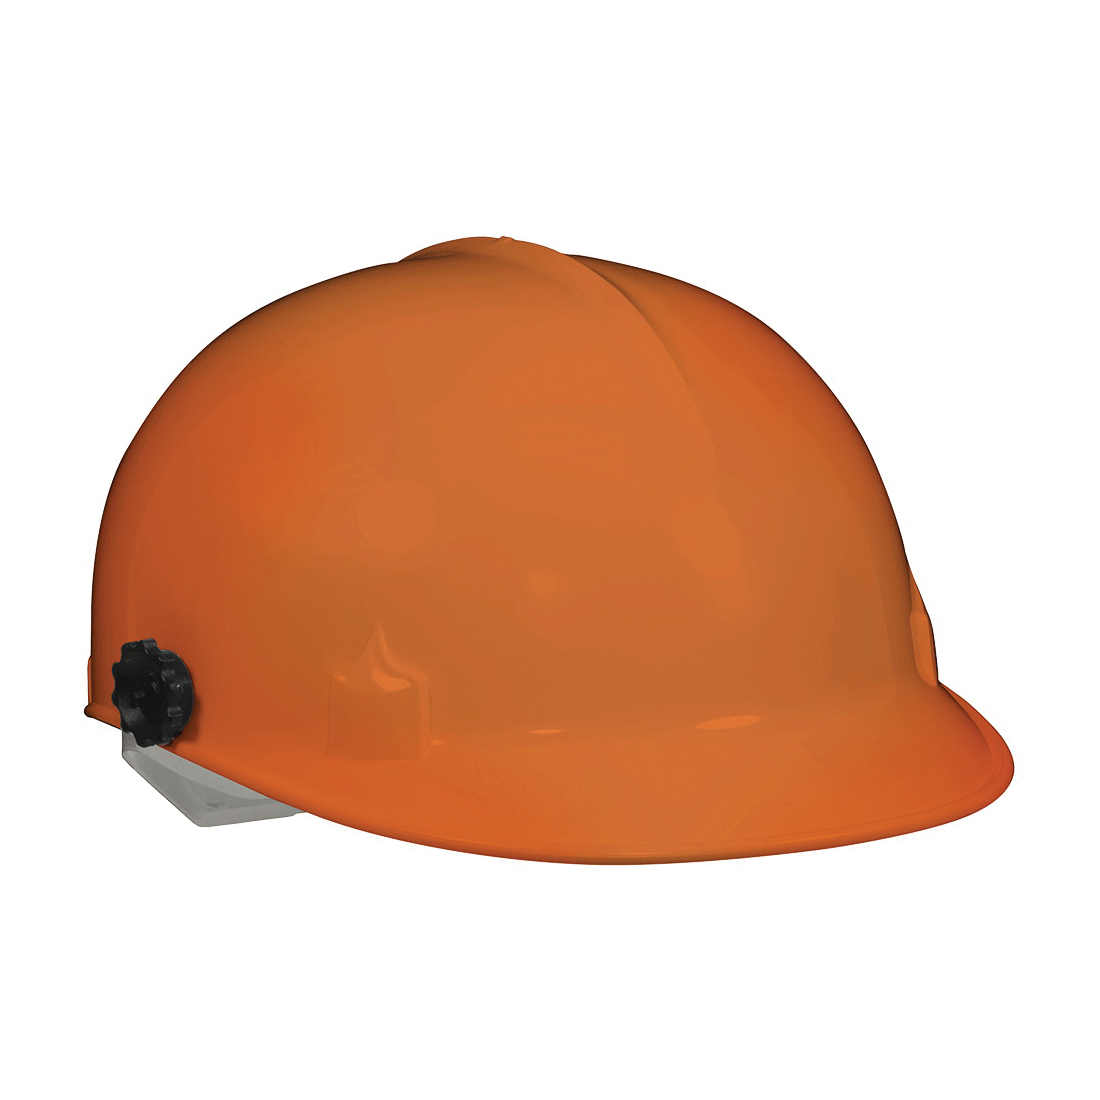 Jackson Safety* 14814 C10 Lightweight Bump Cap, Orange, HDPE, 4-Point Pinlock Suspension redirect to product page